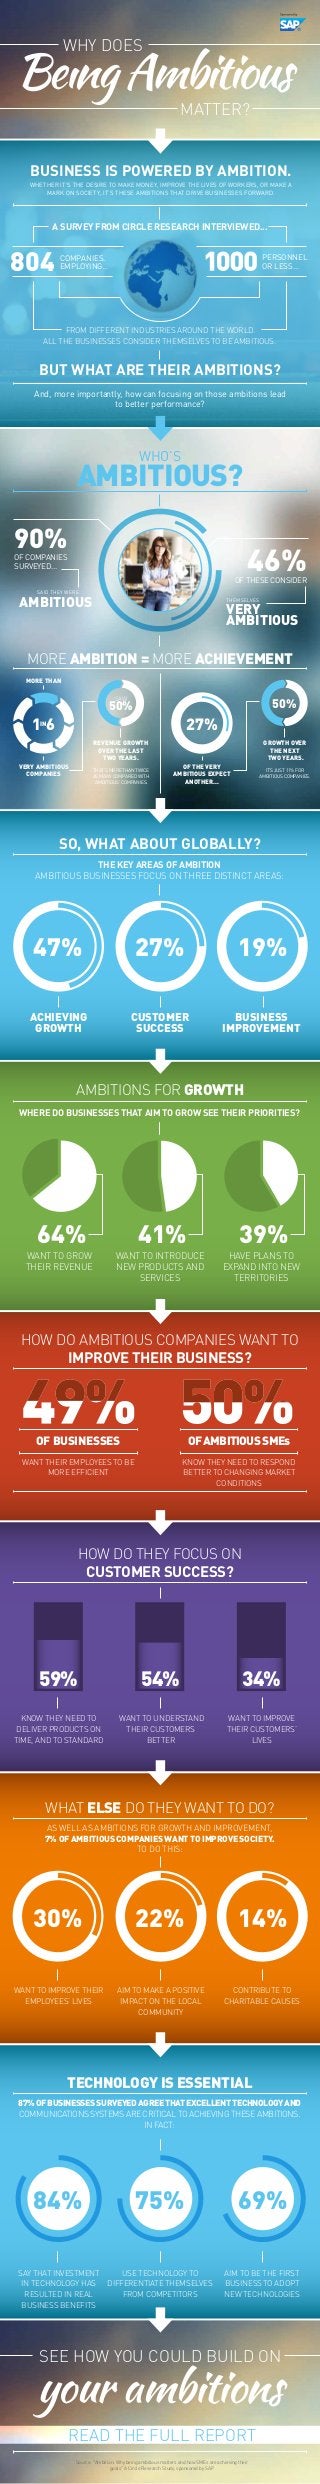 MATTER? 
BUSINESS IS POWERED BY AMBITION. 
WHETHER IT’S THE DESIRE TO MAKE MONEY, IMPROVE THE LIVES OF WORKERS, OR MAKE A 
MARK ON SOCIETY, IT’S THESE AMBITIONS THAT DRIVE BUSINESSES FORWARD. 
A SURVEY FROM CIRCLE RESEARCH INTERVIEWED... 
FROM DIFFERENT INDUSTRIES AROUND THE WORLD. 
ALL THE BUSINESSES CONSIDER THEMSELVES TO BE AMBITIOUS. 
OF COMPANIES 
SURVEYED... 46% 
OF THESE CONSIDER 
VERY 
MORE AMBITION = MORE ACHIEVEMENT 
MORE THAN 
AMBITIOUS? WHO’S 
SAID THEY WERE 
AMBITIOUS THEMSELVES 
AMBITIOUS 
WHY DOES 
COMPANIES. 
EMPLOYING... 
PERSONNEL 
OR LESS... 
BUT WHAT ARE THEIR AMBITIONS? 
And, more importantly, how can focusing on those ambitions lead 
to better performance? 
VERY AMBITIOUS 
COMPANIES 
50% SAW 
1IN6 
REVENUE GROWTH 
OVER THE LAST 
TWO YEARS. 
THAT’S MORE THAN TWICE 
AS MANY COMPARED WITH 
‘AMBITIOUS’ COMPANIES. 
27% 
OF THE VERY 
AMBITIOUS EXPECT 
ANOTHER... 
50% 
GROWTH OVER 
THE NEXT 
TWO YEARS. 
IT’S JUST 11% FOR 
AMBITIOUS COMPANIES. 
SO, WHAT ABOUT GLOBALLY? 
THE KEY AREAS OF AMBITION 
AMBITIOUS BUSINESSES FOCUS ON THREE DISTINCT AREAS: 
47% 
ACHIEVING 
GROWTH 
27% 19% 
CUSTOMER 
SUCCESS 
BUSINESS 
IMPROVEMENT 
AMBITIONS FOR GROWTH 
WHERE DO BUSINESSES THAT AIM TO GROW SEE THEIR PRIORITIES? 
64% 
WANT TO GROW 
THEIR REVENUE 
41% 
WANT TO INTRODUCE 
NEW PRODUCTS AND 
SERVICES 
39% 
HAVE PLANS TO 
EXPAND INTO NEW 
TERRITORIES 
HOW DO AMBITIOUS COMPANIES WANT TO 
IMPROVE THEIR BUSINESS? 
OF BUSINESSES 
WANT THEIR EMPLOYEES TO BE 
MORE EFFICIENT 
OF AMBITIOUS SMEs 
KNOW THEY NEED TO RESPOND 
BETTER TO CHANGING MARKET 
CONDITIONS 
HOW DO THEY FOCUS ON 
CUSTOMER SUCCESS? 
59% 
KNOW THEY NEED TO 
DELIVER PRODUCTS ON 
TIME, AND TO STANDARD 
54% 
WANT TO UNDERSTAND 
THEIR CUSTOMERS 
BETTER 
34% 
WANT TO IMPROVE 
THEIR CUSTOMERS’ 
LIVES 
WHAT ELSE DO THEY WANT TO DO? 
AS WELL AS AMBITIONS FOR GROWTH AND IMPROVEMENT, 
7% OF AMBITIOUS COMPANIES WANT TO IMPROVE SOCIETY. 
TO DO THIS: 
30% 22% 14% 
WANT TO IMPROVE THEIR 
EMPLOYEES’ LIVES 
AIM TO MAKE A POSITIVE 
IMPACT ON THE LOCAL 
COMMUNITY 
CONTRIBUTE TO 
CHARITABLE CAUSES 
TECHNOLOGY IS ESSENTIAL 
87% OF BUSINESSES SURVEYED AGREE THAT EXCELLENT TECHNOLOGY AND 
COMMUNICATIONS SYSTEMS ARE CRITICAL TO ACHIEVING THESE AMBITIONS. 
IN FACT: 
84% 75% 69% 
SAY THAT INVESTMENT 
IN TECHNOLOGY HAS 
RESULTED IN REAL 
BUSINESS BENEFITS 
USE TECHNOLOGY TO 
DIFFERENTIATE THEMSELVES 
FROM COMPETITORS 
AIM TO BE THE FIRST 
BUSINESS TO ADOPT 
NEW TECHNOLOGIES 
SEE HOW YOU COULD BUILD ON your ambitions 
READ THE FULL REPORT 
Source: "Ambition: Why being ambitious matters and how SMEs are achieving their 
goals" A Circle Research Study, sponsored by SAP 
804 
90% 
